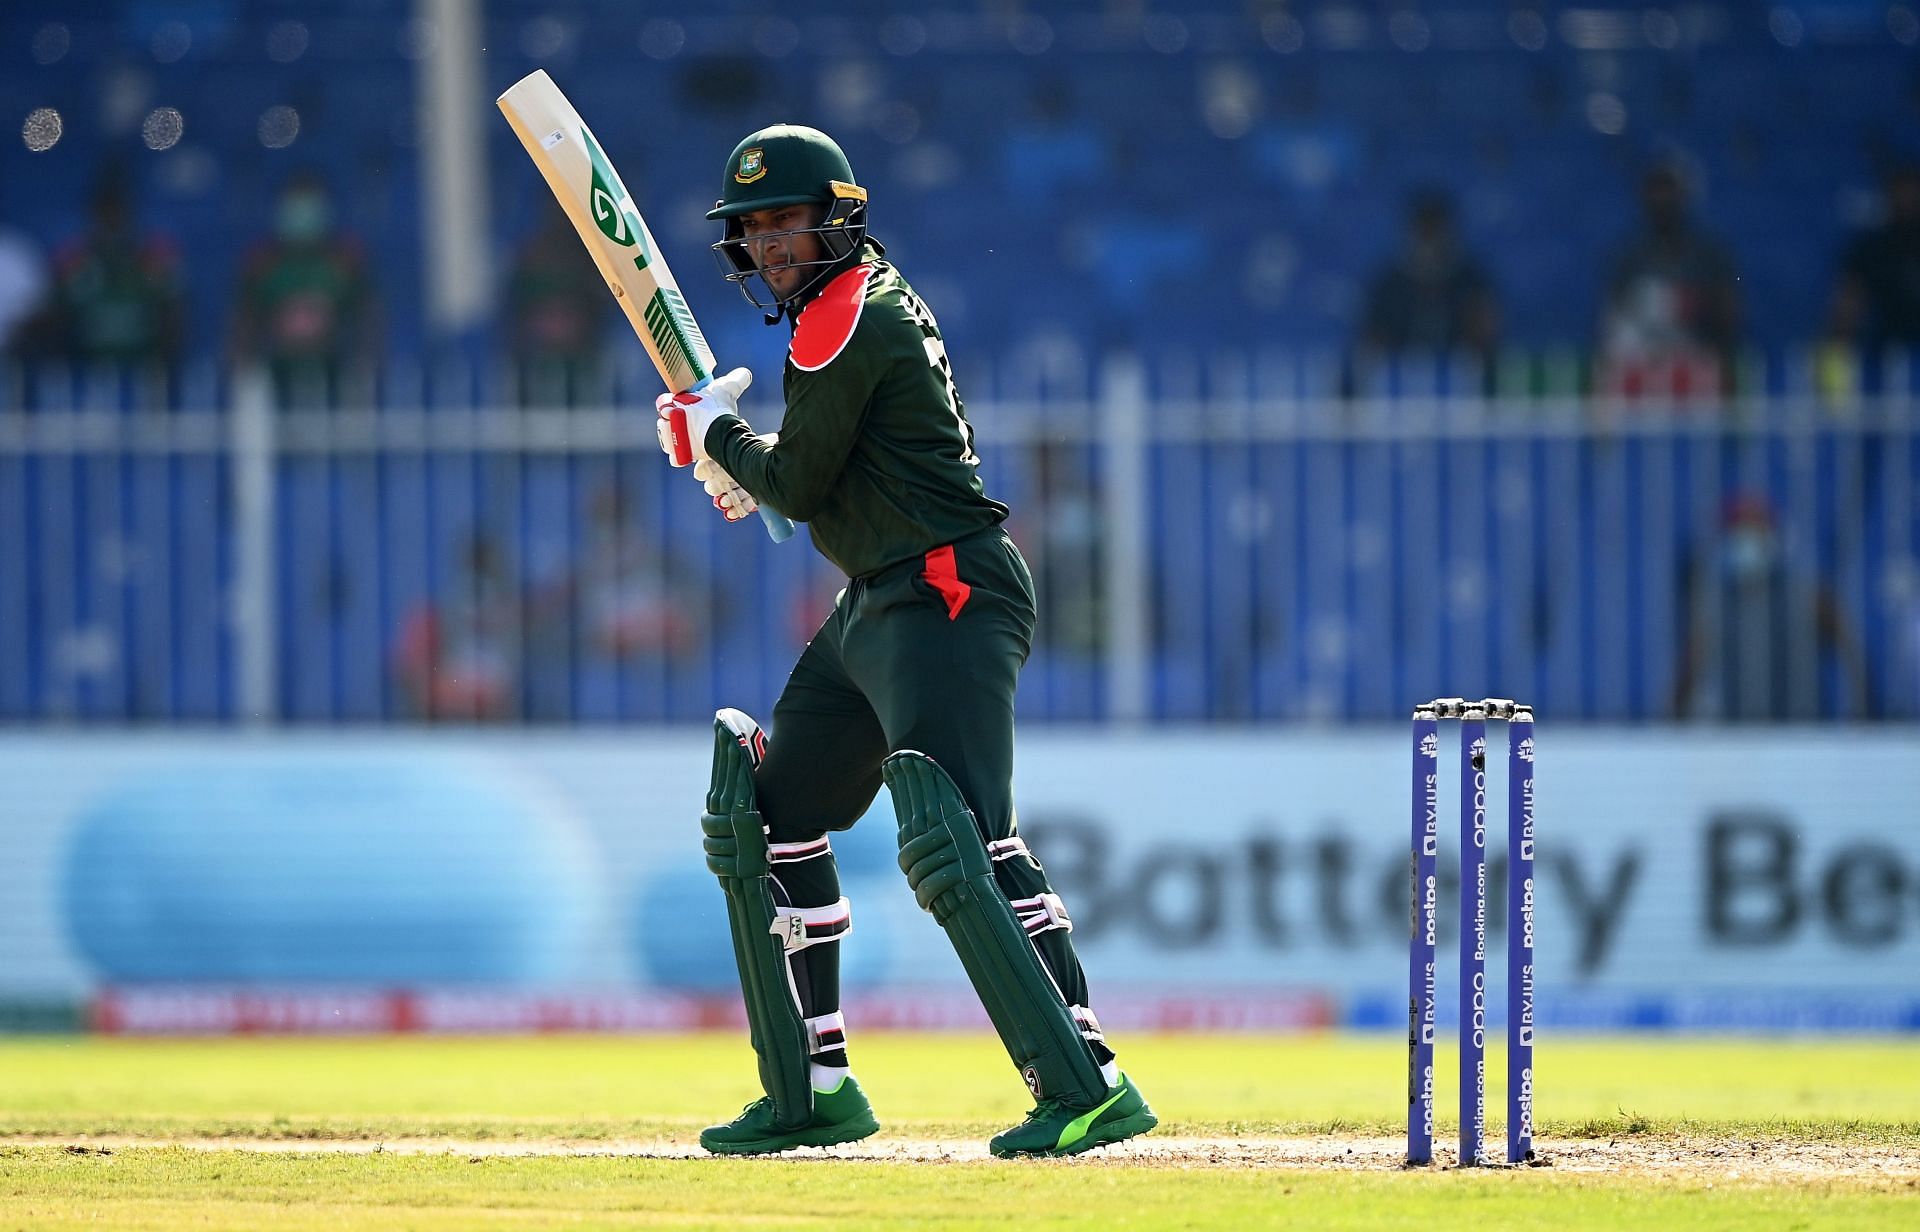 Shakib Al Hasan has been on song in this competition